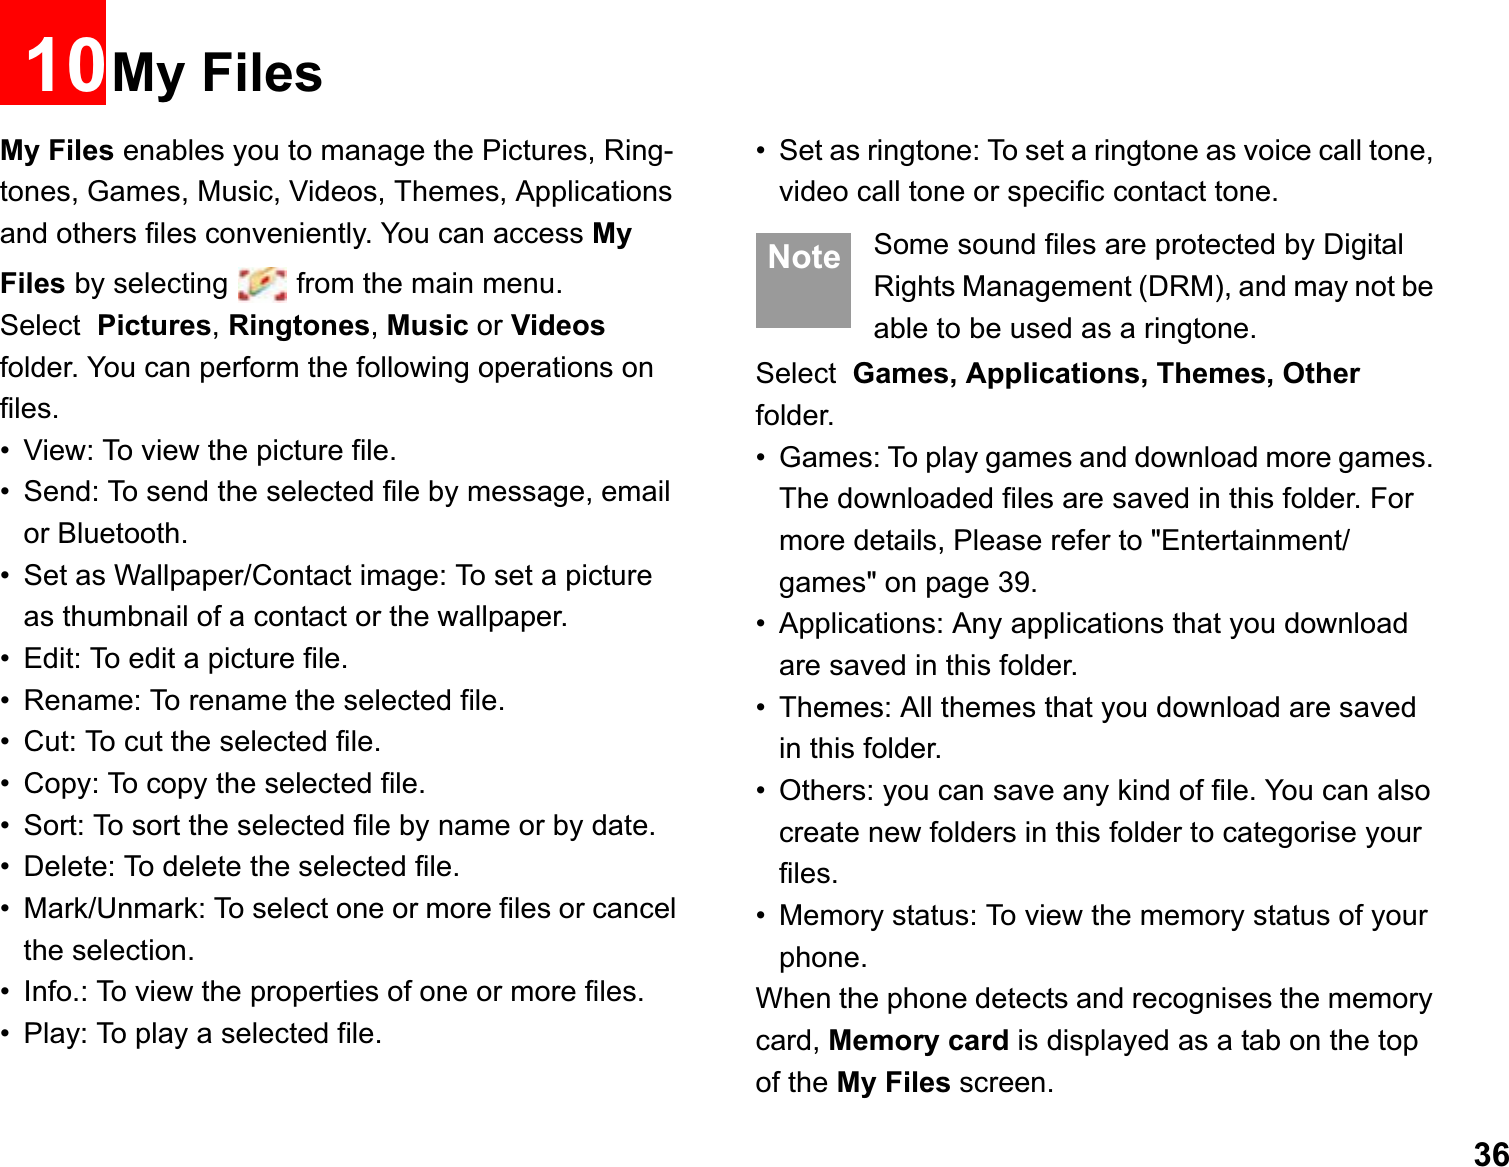 3610My FilesMy Files enables you to manage the Pictures, Ring-tones, Games, Music, Videos, Themes, Applications and others files conveniently. You can access MyFiles by selecting   from the main menu.Select Pictures, Ringtones, Music or Videosfolder. You can perform the following operations on  files.• View: To view the picture file.• Send: To send the selected file by message, email or Bluetooth.• Set as Wallpaper/Contact image: To set a picture as thumbnail of a contact or the wallpaper.• Edit: To edit a picture file.• Rename: To rename the selected file.• Cut: To cut the selected file.• Copy: To copy the selected file.• Sort: To sort the selected file by name or by date.• Delete: To delete the selected file.• Mark/Unmark: To select one or more files or cancel the selection.• Info.: To view the properties of one or more files.• Play: To play a selected file.• Set as ringtone: To set a ringtone as voice call tone, video call tone or specific contact tone. Note Some sound files are protected by Digital Rights Management (DRM), and may not be able to be used as a ringtone.Select Games, Applications, Themes, Other folder.• Games: To play games and download more games. The downloaded files are saved in this folder. For more details, Please refer to &quot;Entertainment/games&quot; on page 39.• Applications: Any applications that you download are saved in this folder.• Themes: All themes that you download are saved in this folder.• Others: you can save any kind of file. You can also create new folders in this folder to categorise your files.• Memory status: To view the memory status of your phone. When the phone detects and recognises the memory card, Memory card is displayed as a tab on the top of the My Files screen.